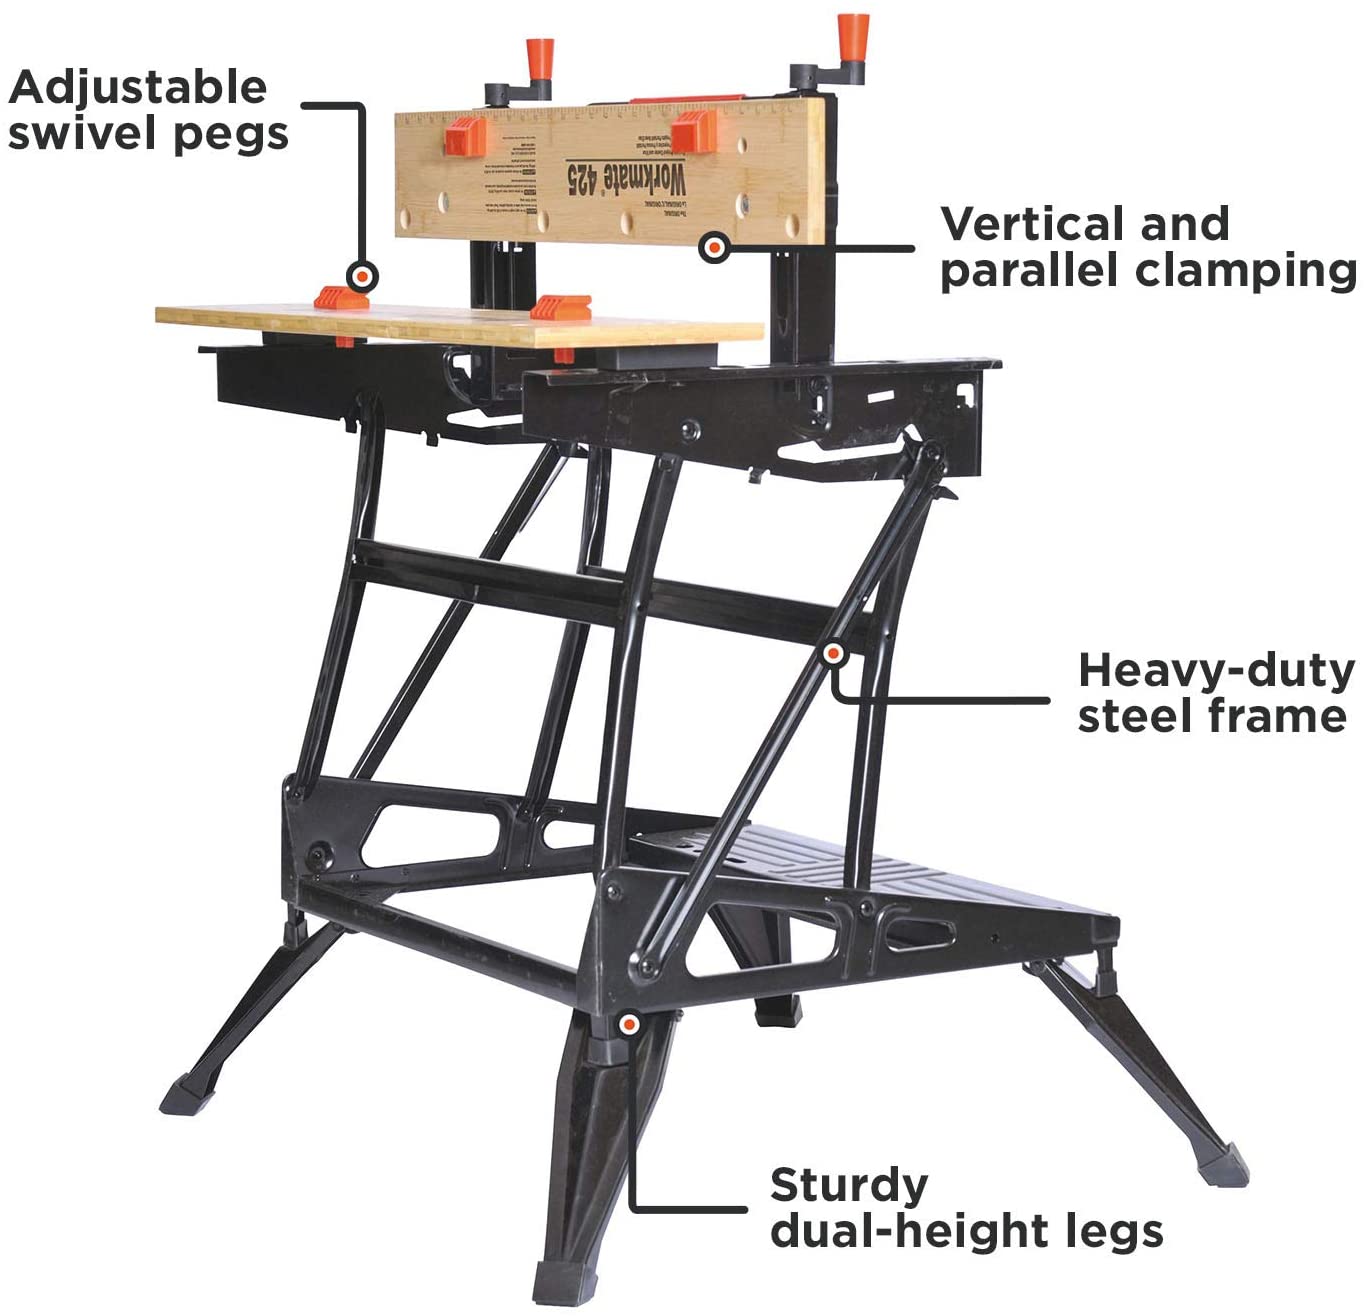 BLACK+DECKER Portable Workbench, Project Center and Vise (WM425-A)